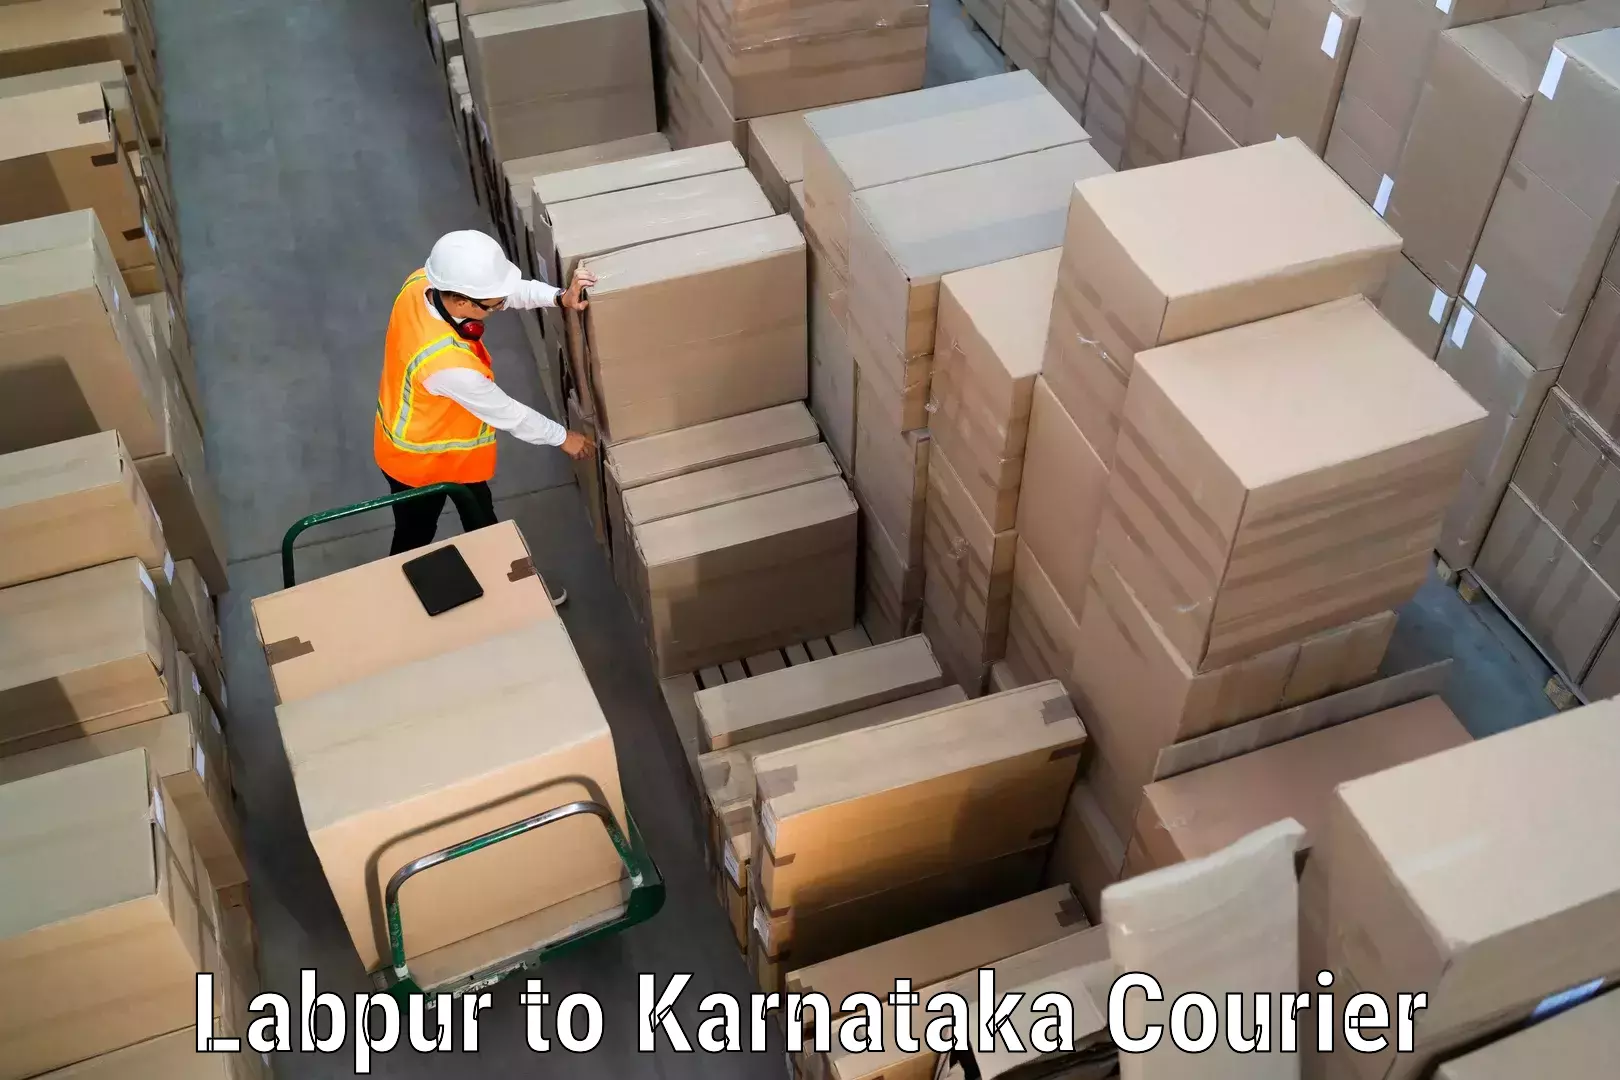 Cost-effective courier options Labpur to Channagiri